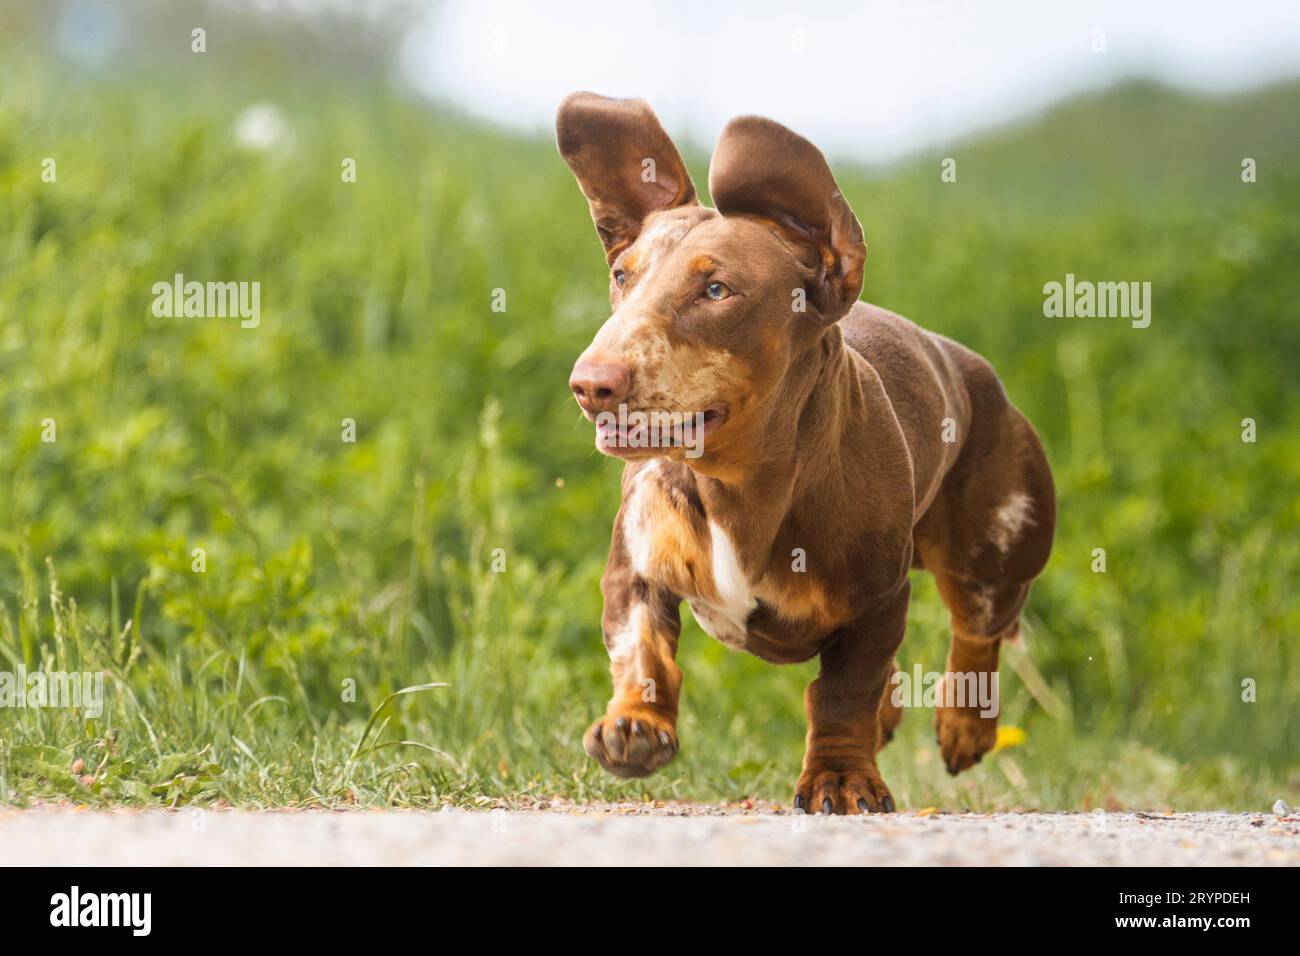 Short-haired brindle Dachshund. Adult male running on a path. Germany Stock Photo